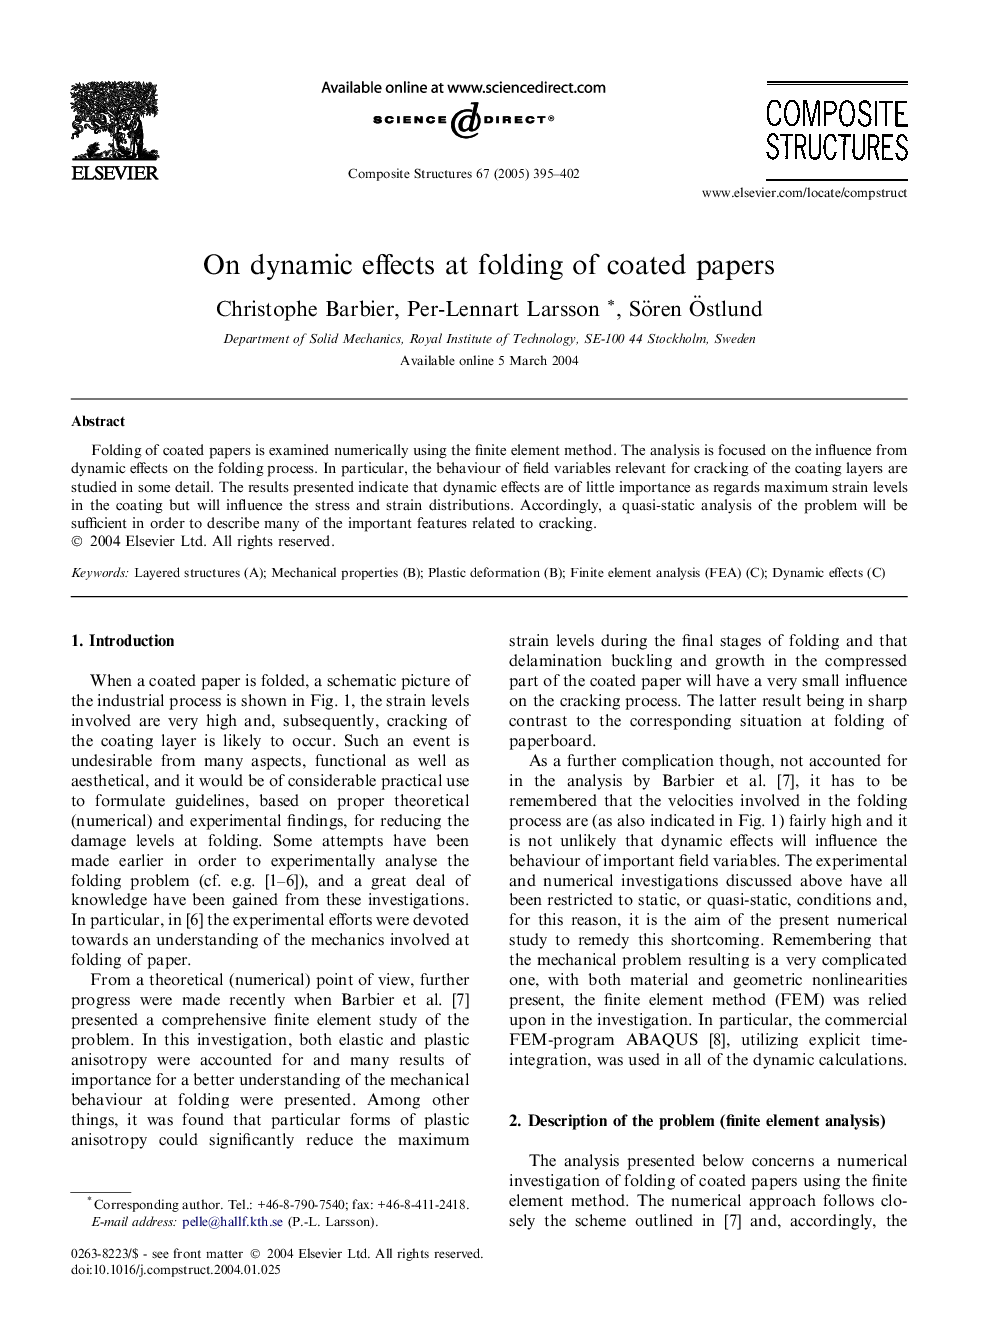 On dynamic effects at folding of coated papers